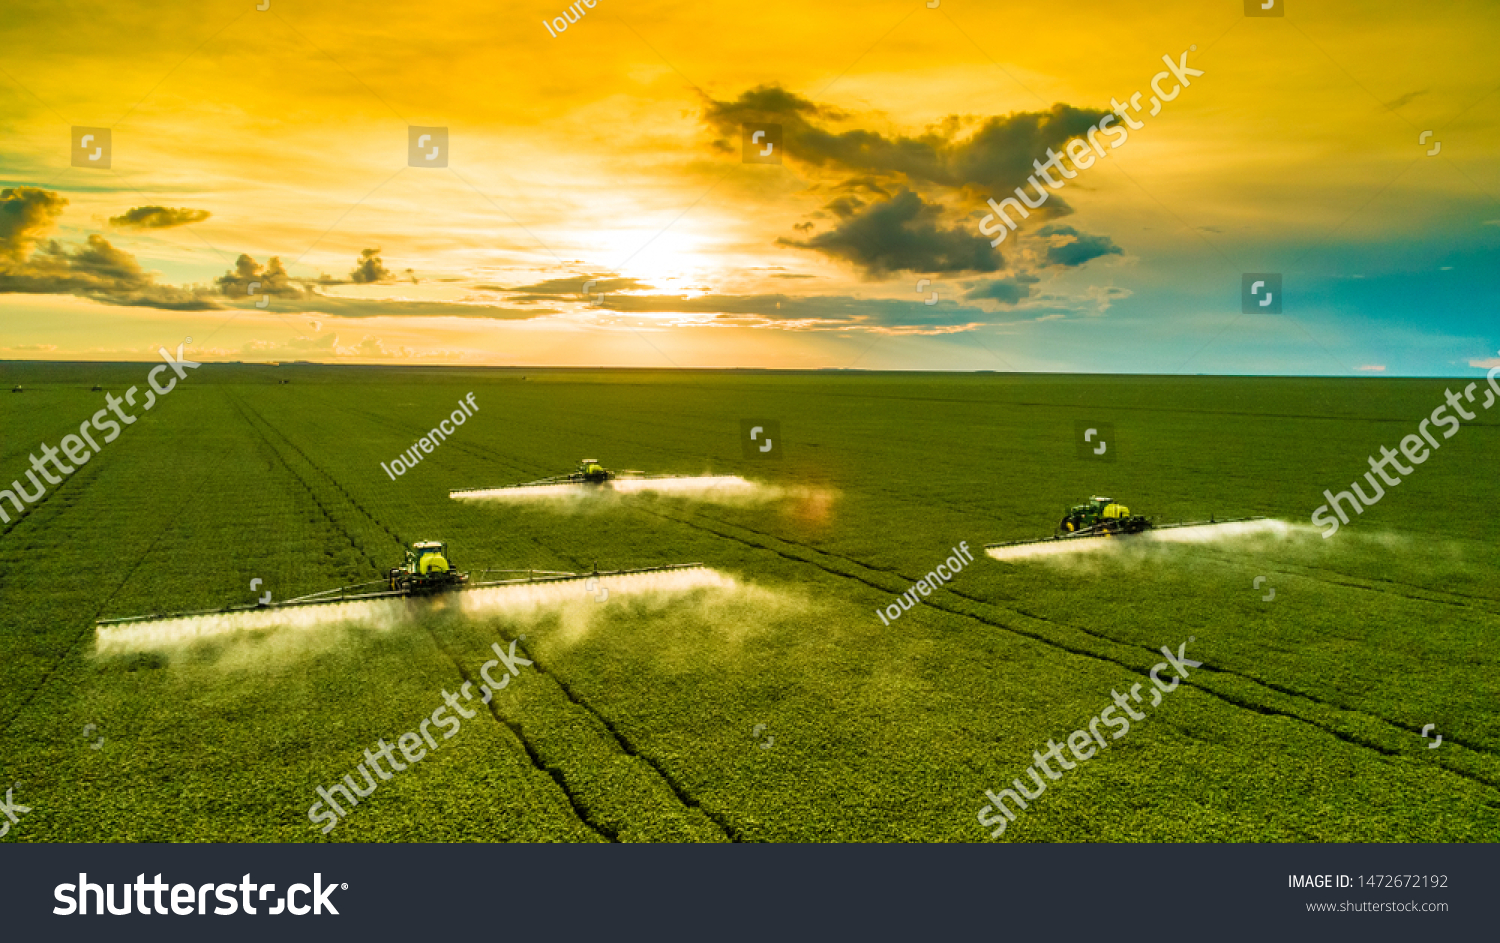 Agricultural sprayers making application at the end of the day with beautiful sunset